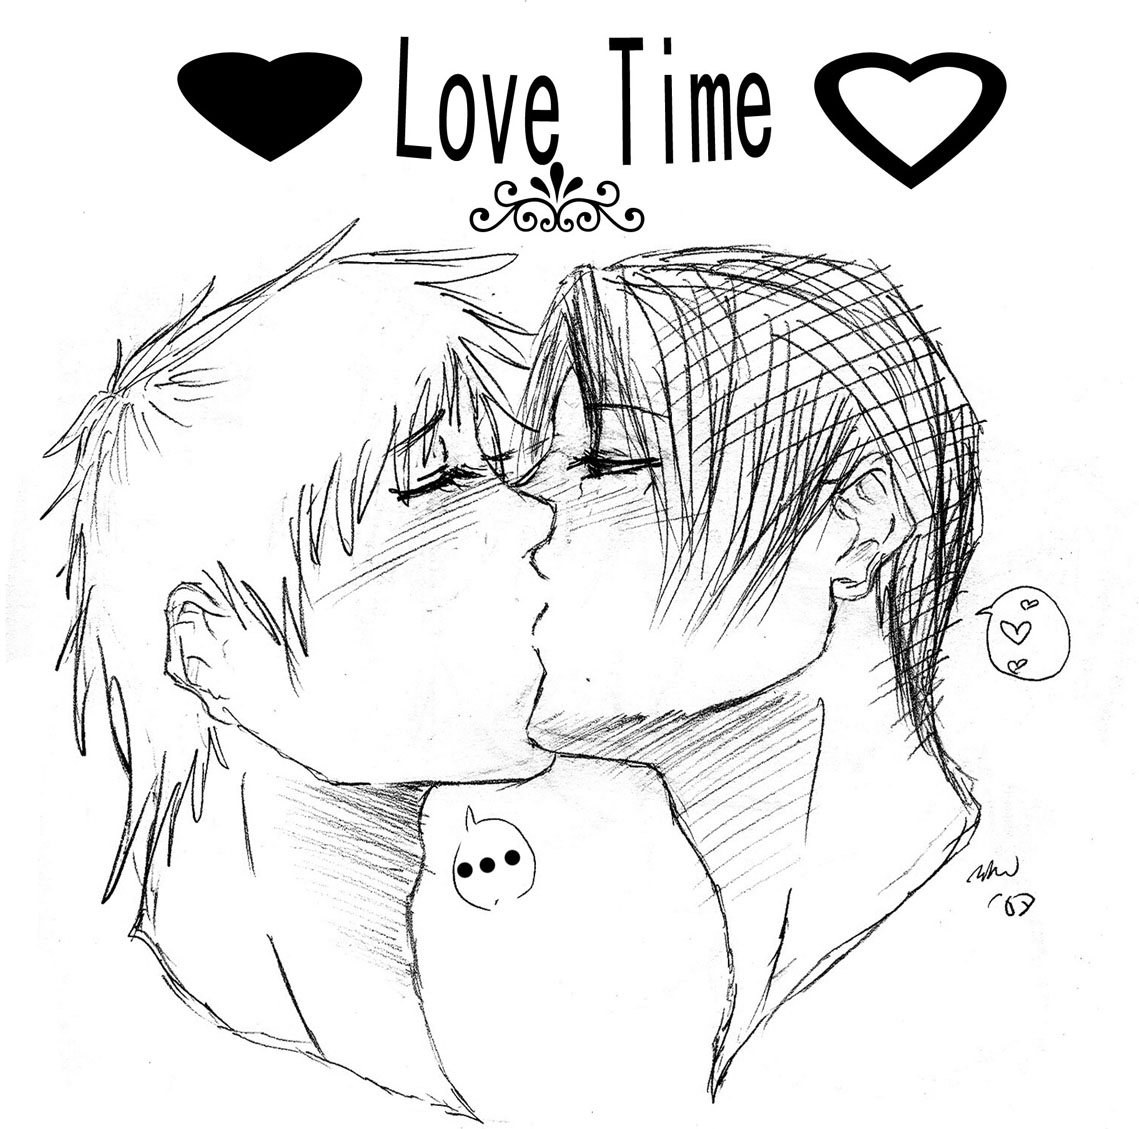 Love Time by HinoSan